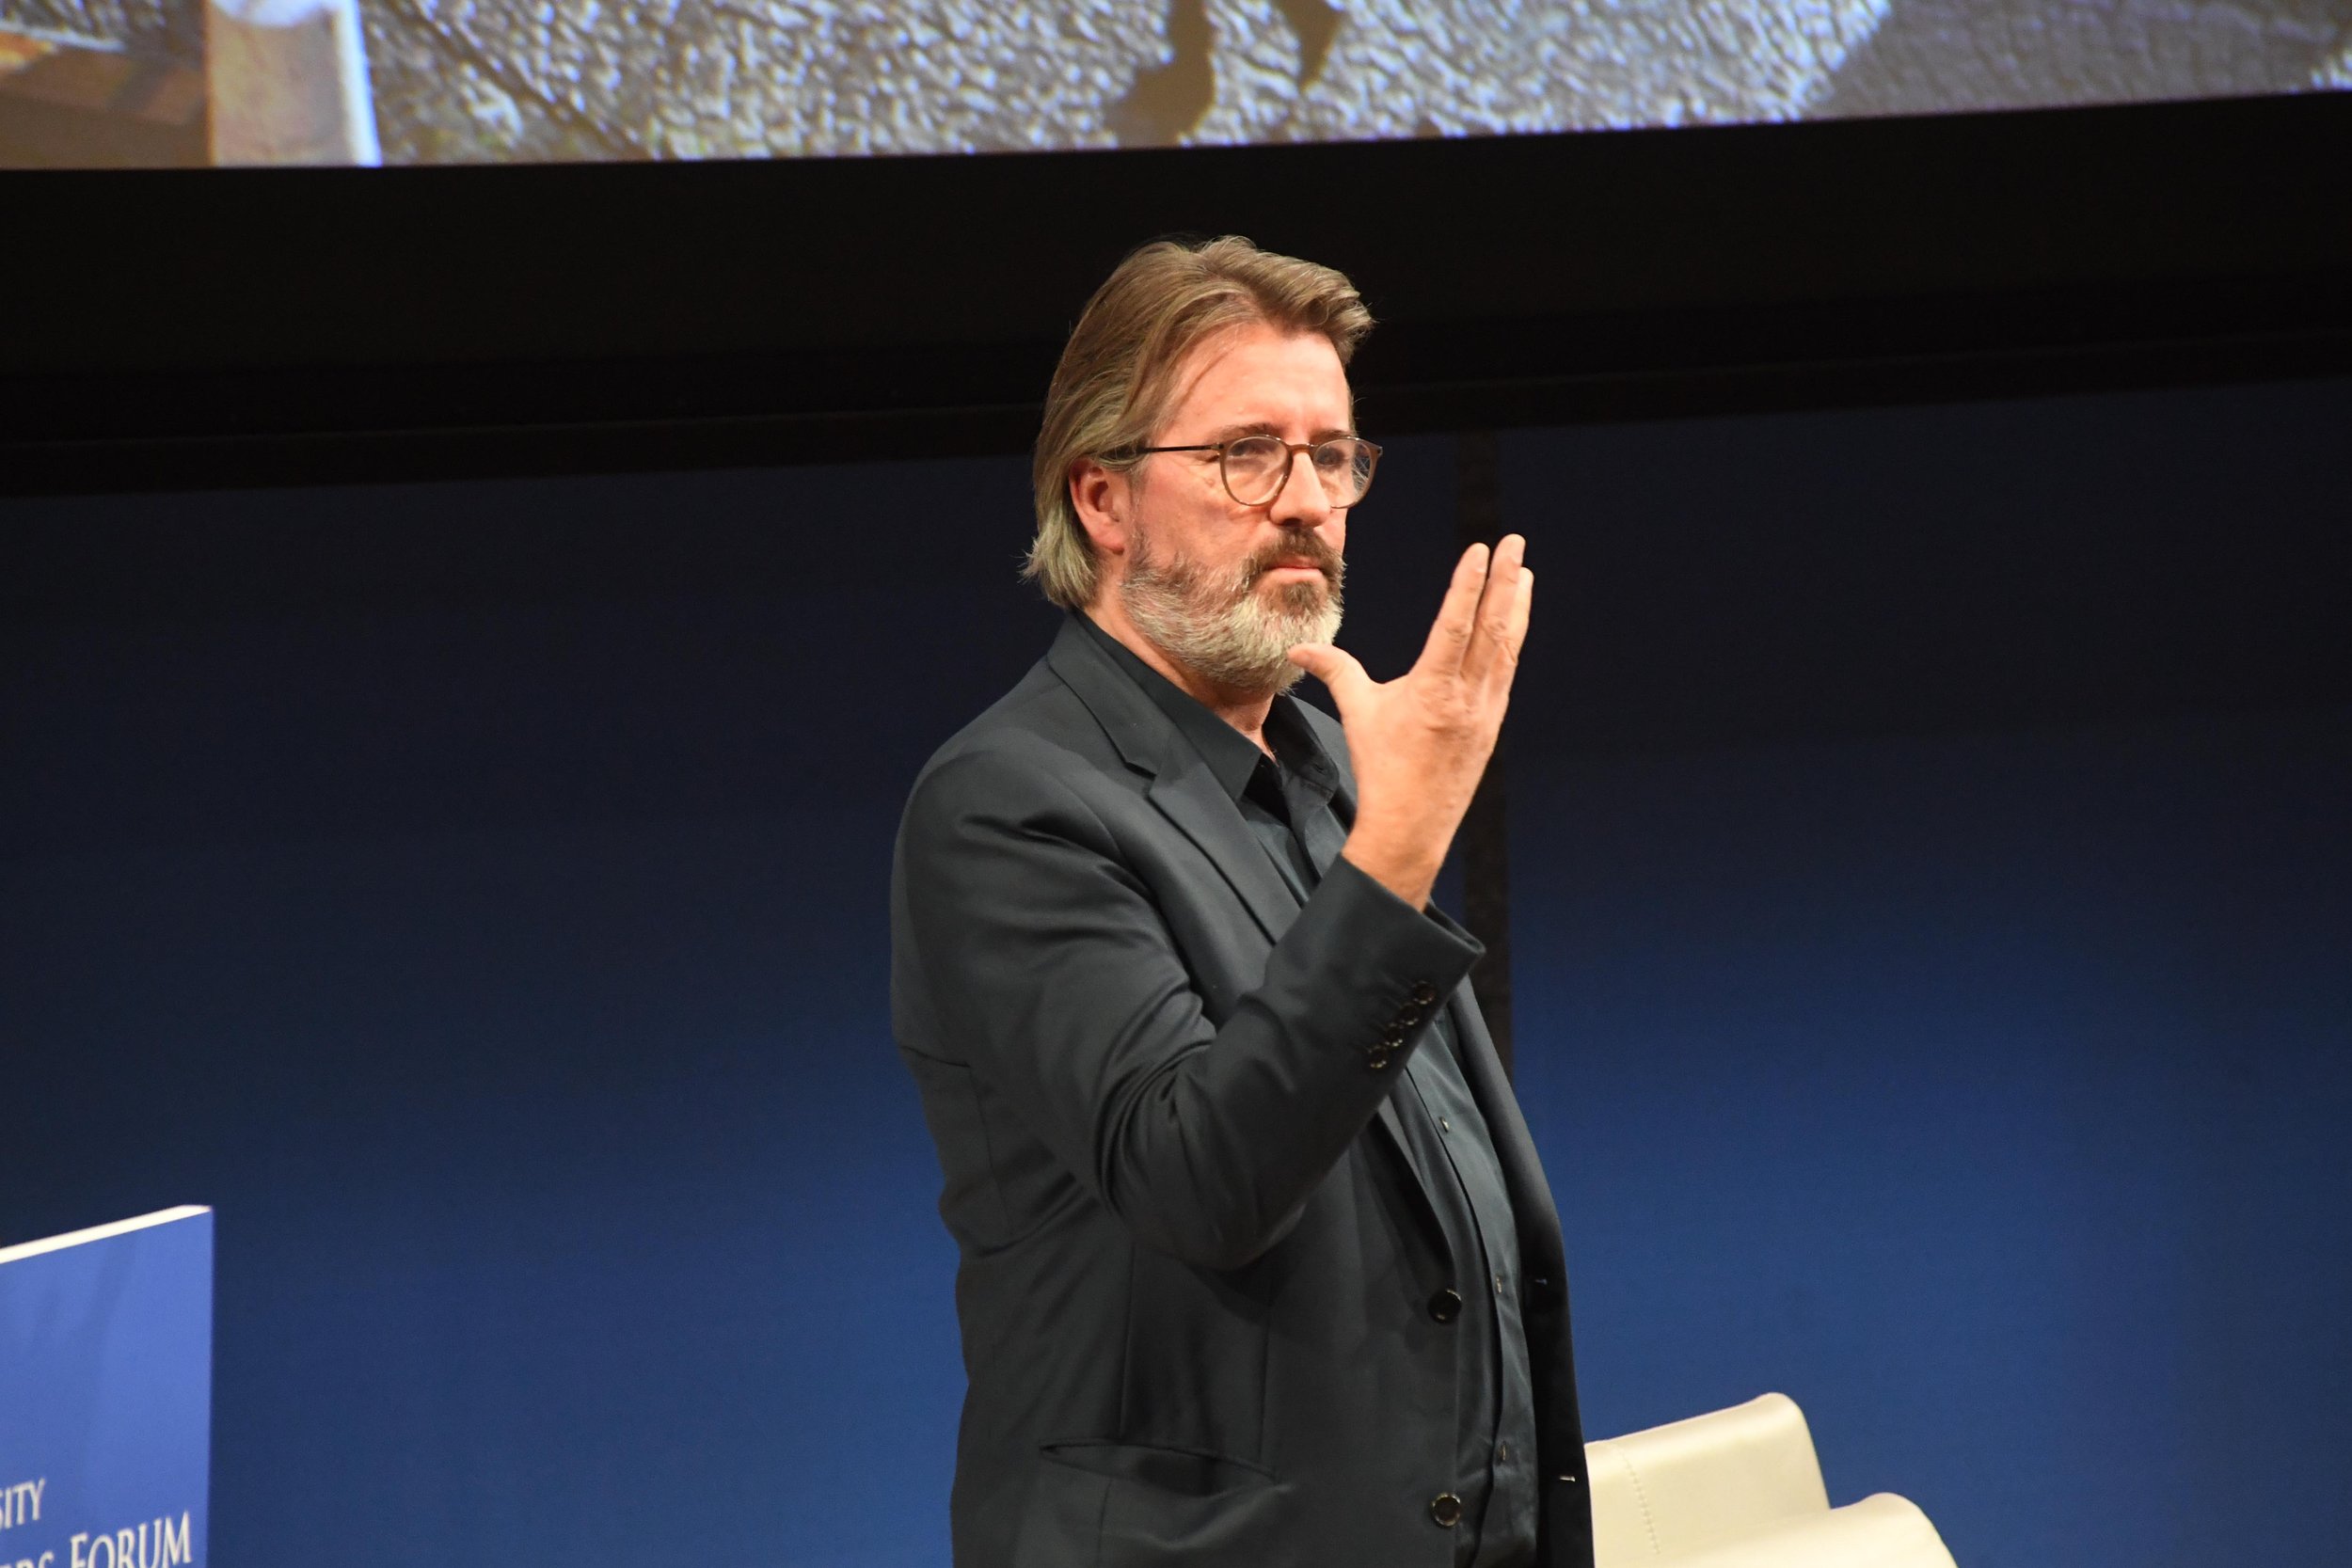  Olafur Eliasson presents his work at the Columbia World Leaders Forum, September  26, 2019. Photo by Eileen Barroso.  